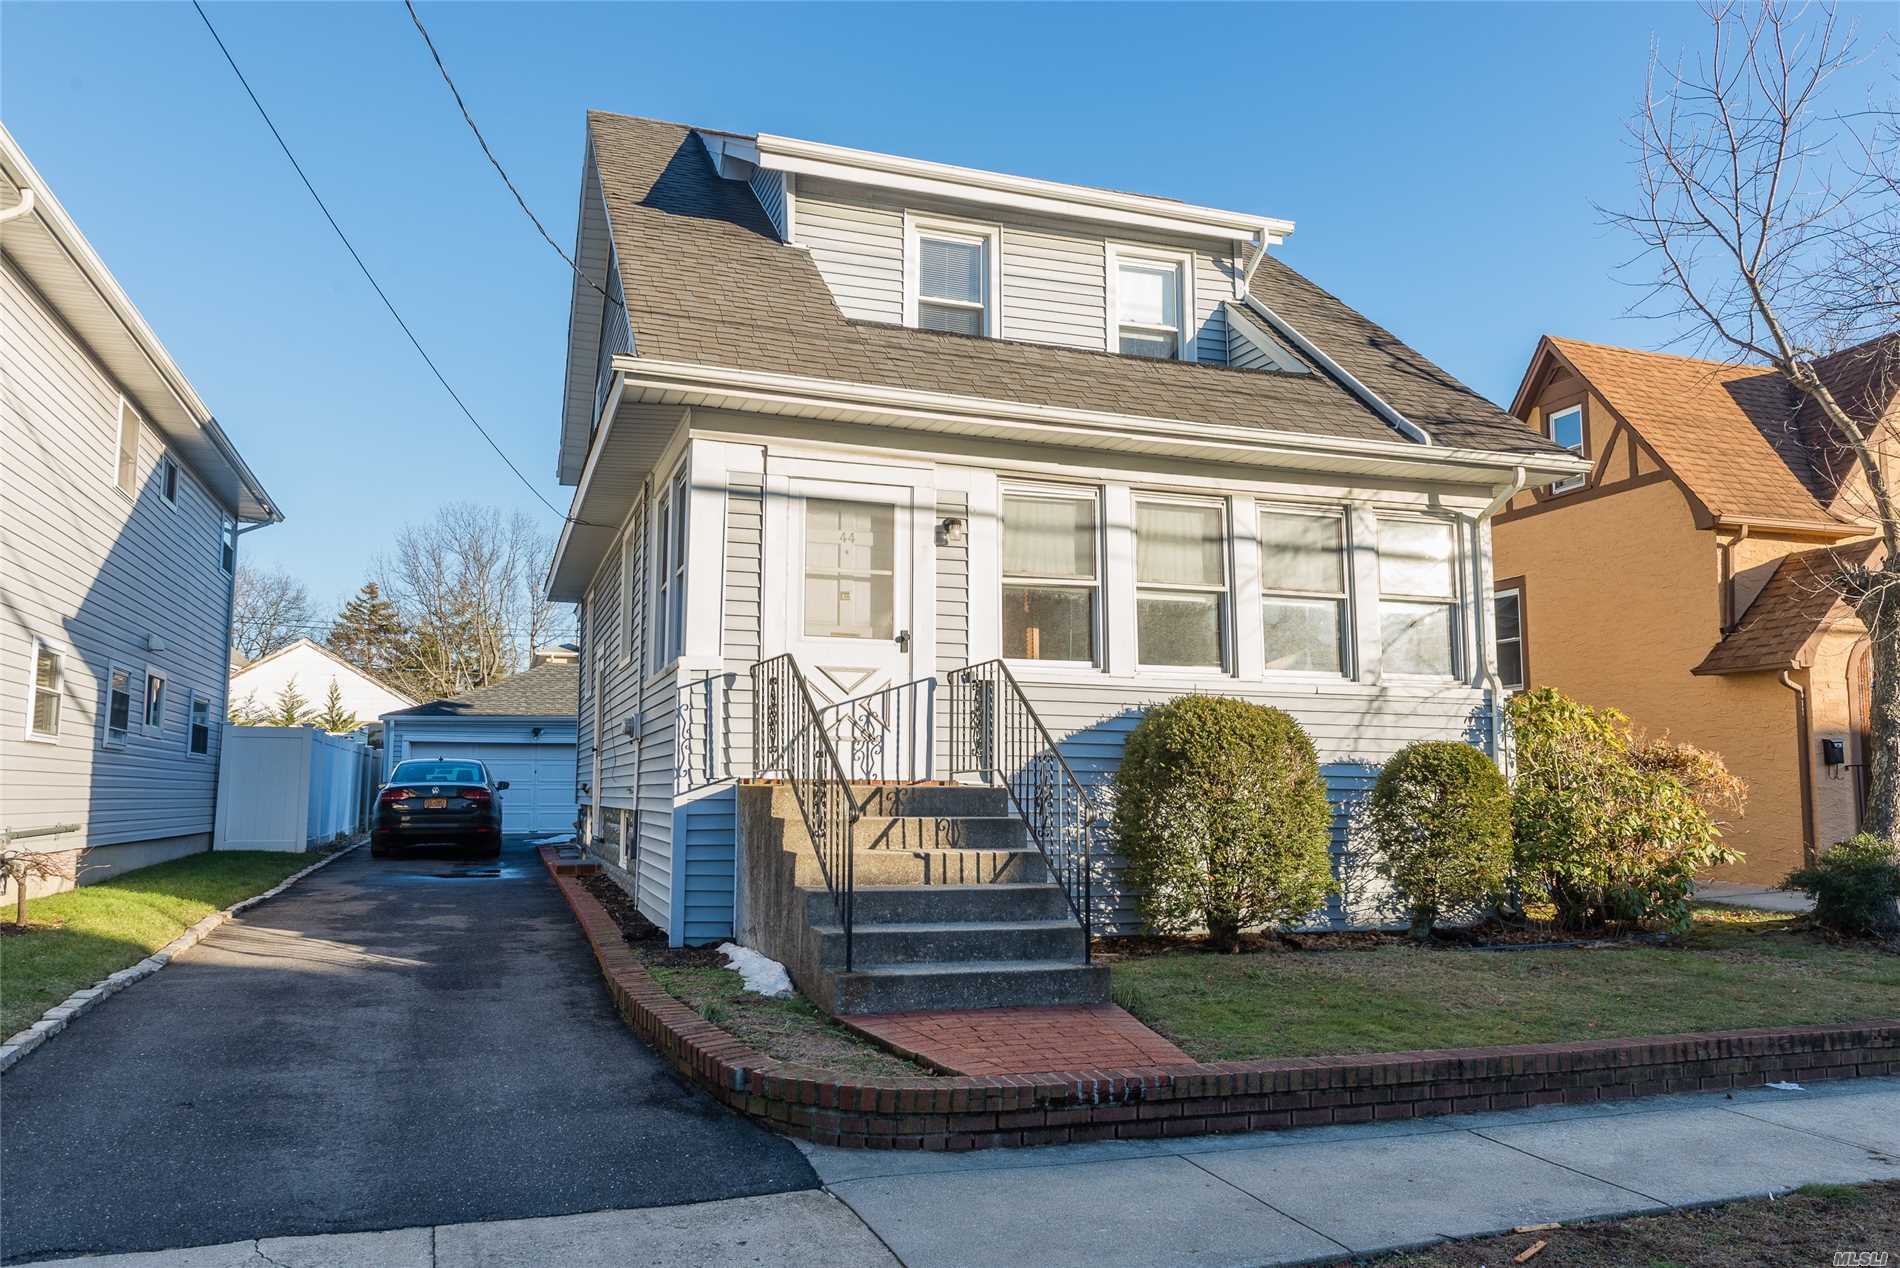 Legal 2 Family Currently Set-Up As A Single Family Colonial With One Kitchen, 3Br Full Bath Over Enclosed Porch, Lr, Fdr, Eik W/Gas Stove, Den & Full Bath. Located Only Minutes From Shopping, Dining, And Lirr. Legal 2 Set-Up 1 Over 2 Bedroom. Full Unfinished Basement Cellar (W/D & Utilities), Plus Attic, 2.5 Car Garage Offer Excellent Storage.